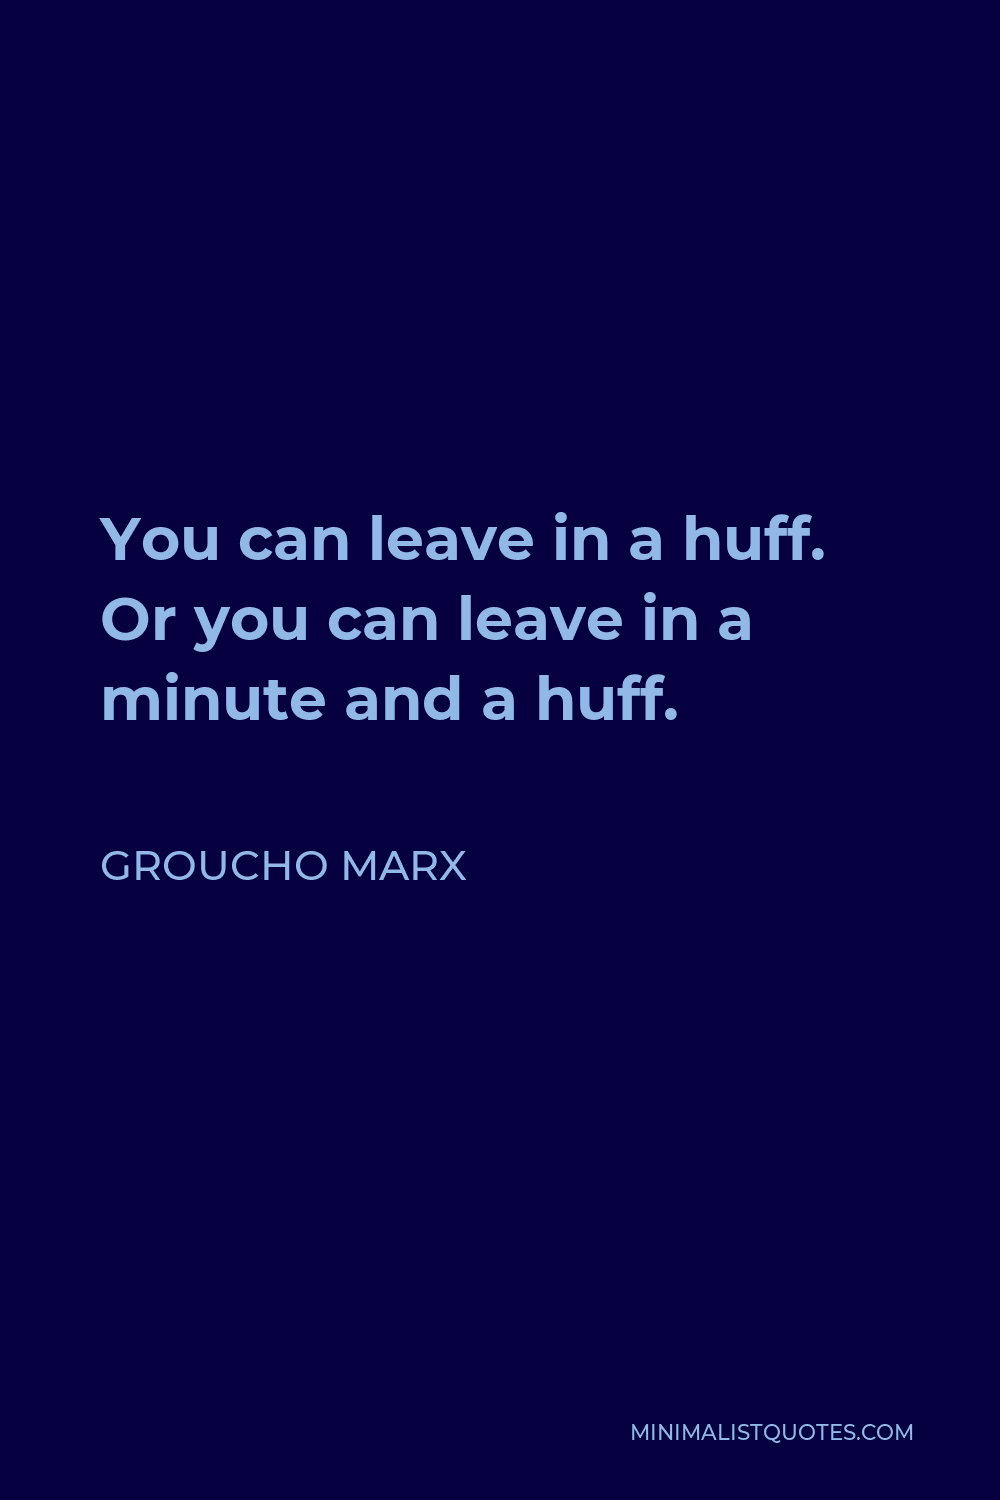 Groucho Marx Quote - You can leave in a huff. Or you can leave in a minute and a huff.